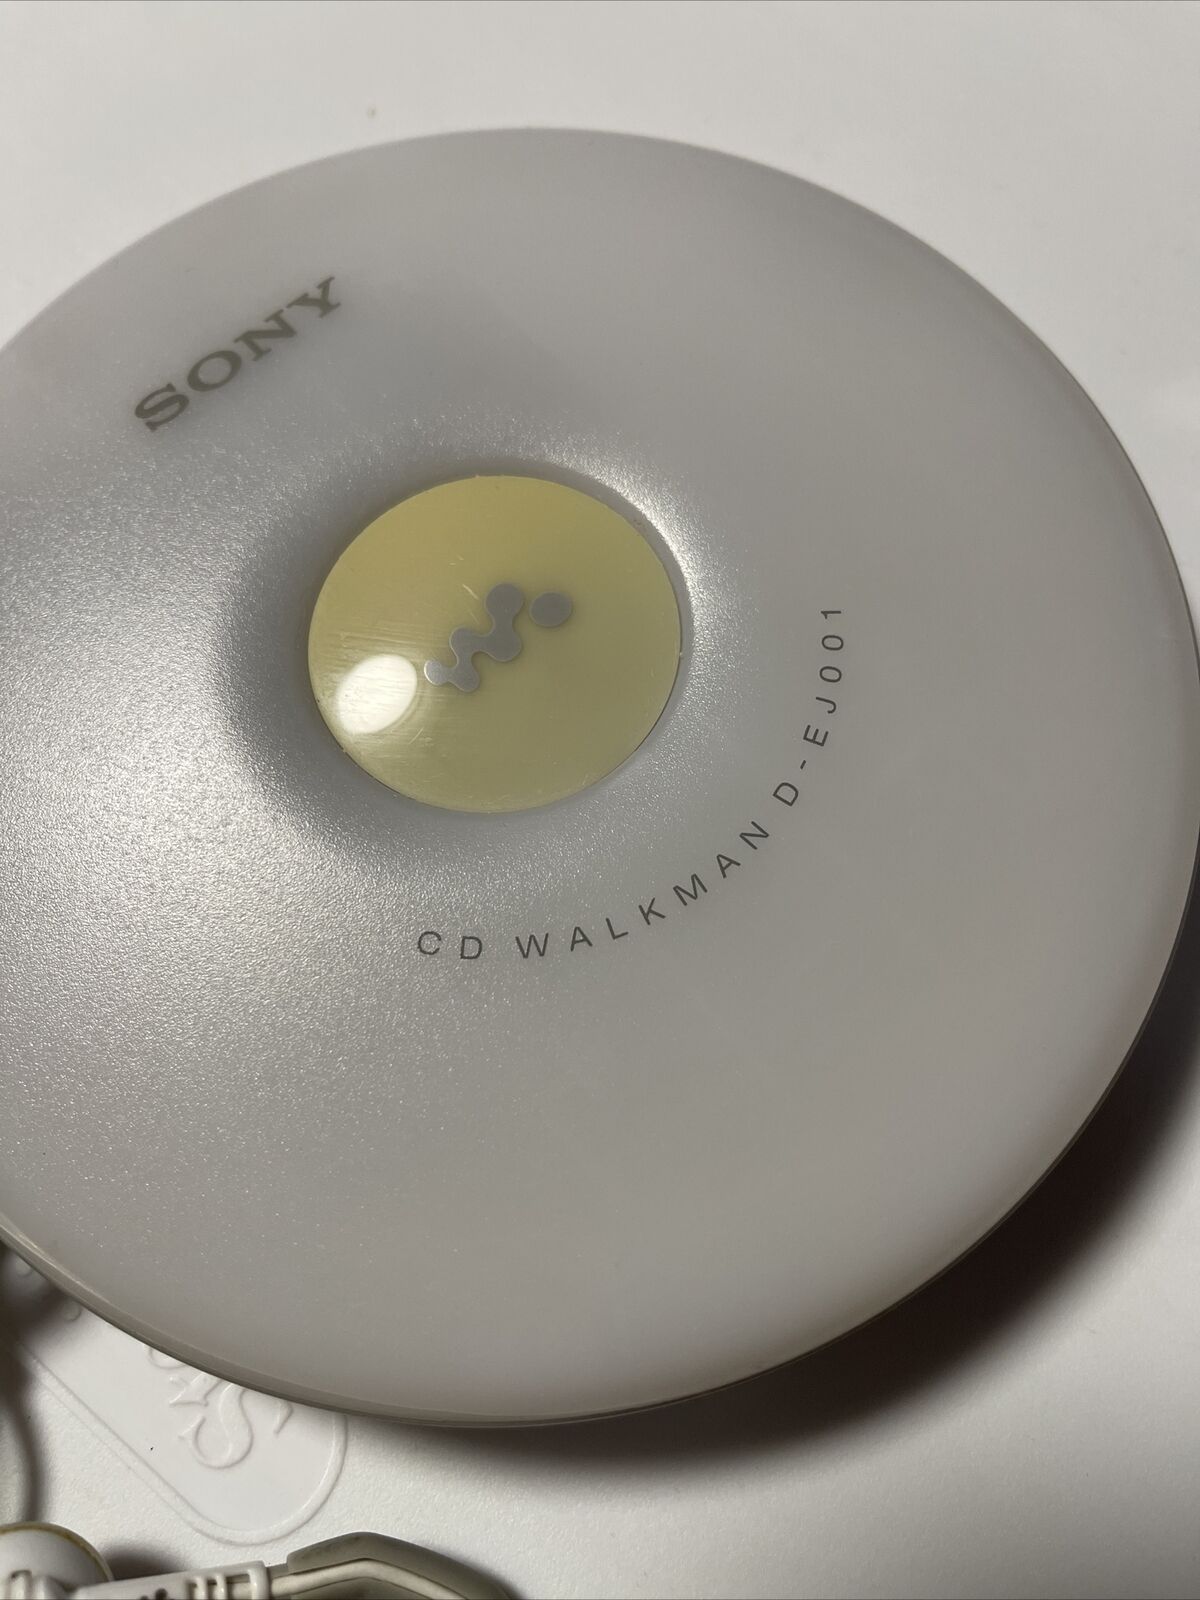 Sony CD Walkman D-EJ001 Portable CD Player With Headphones Works Great (18)